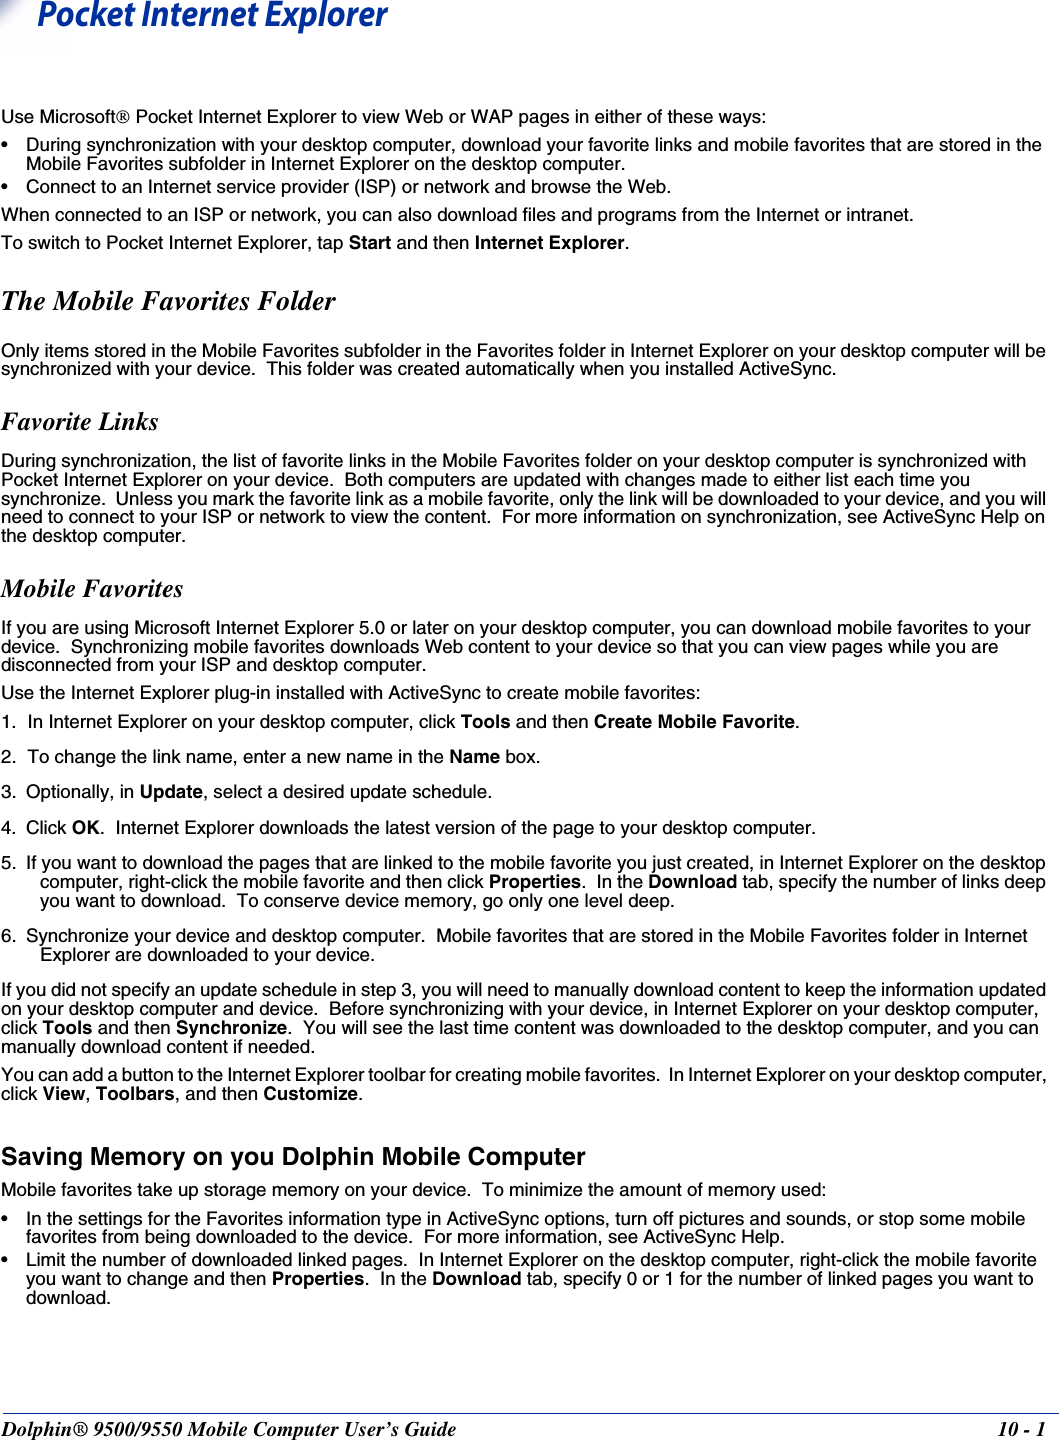 Dolphin® 9500/9550 Mobile Computer User’s Guide 10 - 110Pocket Internet Explorer Use Microsoft Pocket Internet Explorer to view Web or WAP pages in either of these ways:• During synchronization with your desktop computer, download your favorite links and mobile favorites that are stored in the Mobile Favorites subfolder in Internet Explorer on the desktop computer.• Connect to an Internet service provider (ISP) or network and browse the Web.  When connected to an ISP or network, you can also download files and programs from the Internet or intranet.To switch to Pocket Internet Explorer, tap Start and then Internet Explorer.The Mobile Favorites FolderOnly items stored in the Mobile Favorites subfolder in the Favorites folder in Internet Explorer on your desktop computer will be synchronized with your device.  This folder was created automatically when you installed ActiveSync.  Favorite LinksDuring synchronization, the list of favorite links in the Mobile Favorites folder on your desktop computer is synchronized with Pocket Internet Explorer on your device.  Both computers are updated with changes made to either list each time you synchronize.  Unless you mark the favorite link as a mobile favorite, only the link will be downloaded to your device, and you will need to connect to your ISP or network to view the content.  For more information on synchronization, see ActiveSync Help on the desktop computer.Mobile Favorites If you are using Microsoft Internet Explorer 5.0 or later on your desktop computer, you can download mobile favorites to your device.  Synchronizing mobile favorites downloads Web content to your device so that you can view pages while you are disconnected from your ISP and desktop computer.Use the Internet Explorer plug-in installed with ActiveSync to create mobile favorites:1. In Internet Explorer on your desktop computer, click Tools and then Create Mobile Favorite.2. To change the link name, enter a new name in the Name box.  3. Optionally, in Update, select a desired update schedule.4. Click OK.  Internet Explorer downloads the latest version of the page to your desktop computer.5. If you want to download the pages that are linked to the mobile favorite you just created, in Internet Explorer on the desktop computer, right-click the mobile favorite and then click Properties.  In the Download tab, specify the number of links deep you want to download.  To conserve device memory, go only one level deep.6. Synchronize your device and desktop computer.  Mobile favorites that are stored in the Mobile Favorites folder in Internet Explorer are downloaded to your device.If you did not specify an update schedule in step 3, you will need to manually download content to keep the information updated on your desktop computer and device.  Before synchronizing with your device, in Internet Explorer on your desktop computer, click Tools and then Synchronize.  You will see the last time content was downloaded to the desktop computer, and you can manually download content if needed.You can add a button to the Internet Explorer toolbar for creating mobile favorites.  In Internet Explorer on your desktop computer, click View, Toolbars, and then Customize.Saving Memory on you Dolphin Mobile ComputerMobile favorites take up storage memory on your device.  To minimize the amount of memory used:• In the settings for the Favorites information type in ActiveSync options, turn off pictures and sounds, or stop some mobile favorites from being downloaded to the device.  For more information, see ActiveSync Help.• Limit the number of downloaded linked pages.  In Internet Explorer on the desktop computer, right-click the mobile favorite you want to change and then Properties.  In the Download tab, specify 0 or 1 for the number of linked pages you want to download.